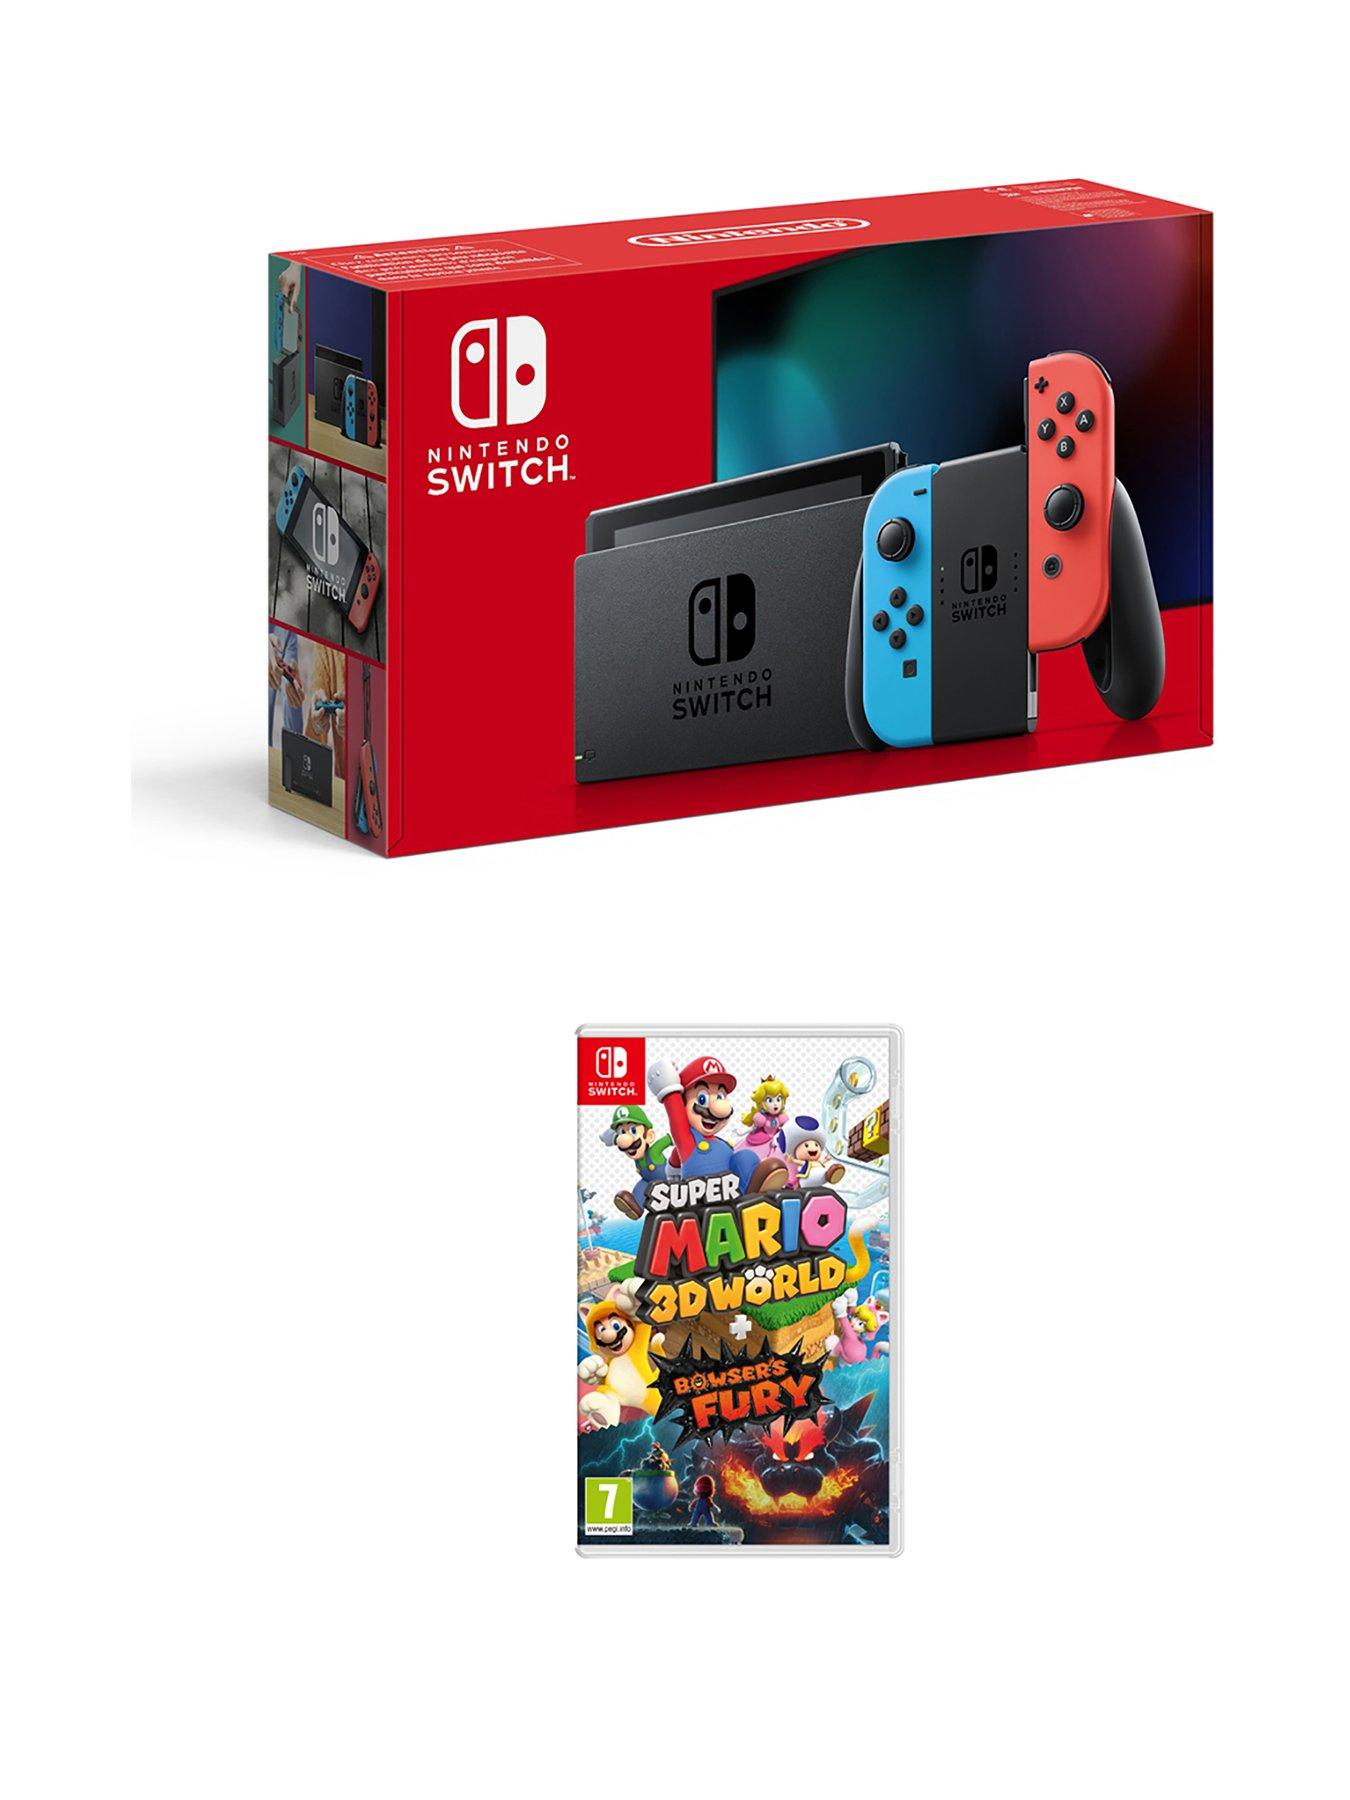 Super Mario 3D World + Bowser's Fury and Wireless Pro Controller Bundle -  Nintendo Switch 